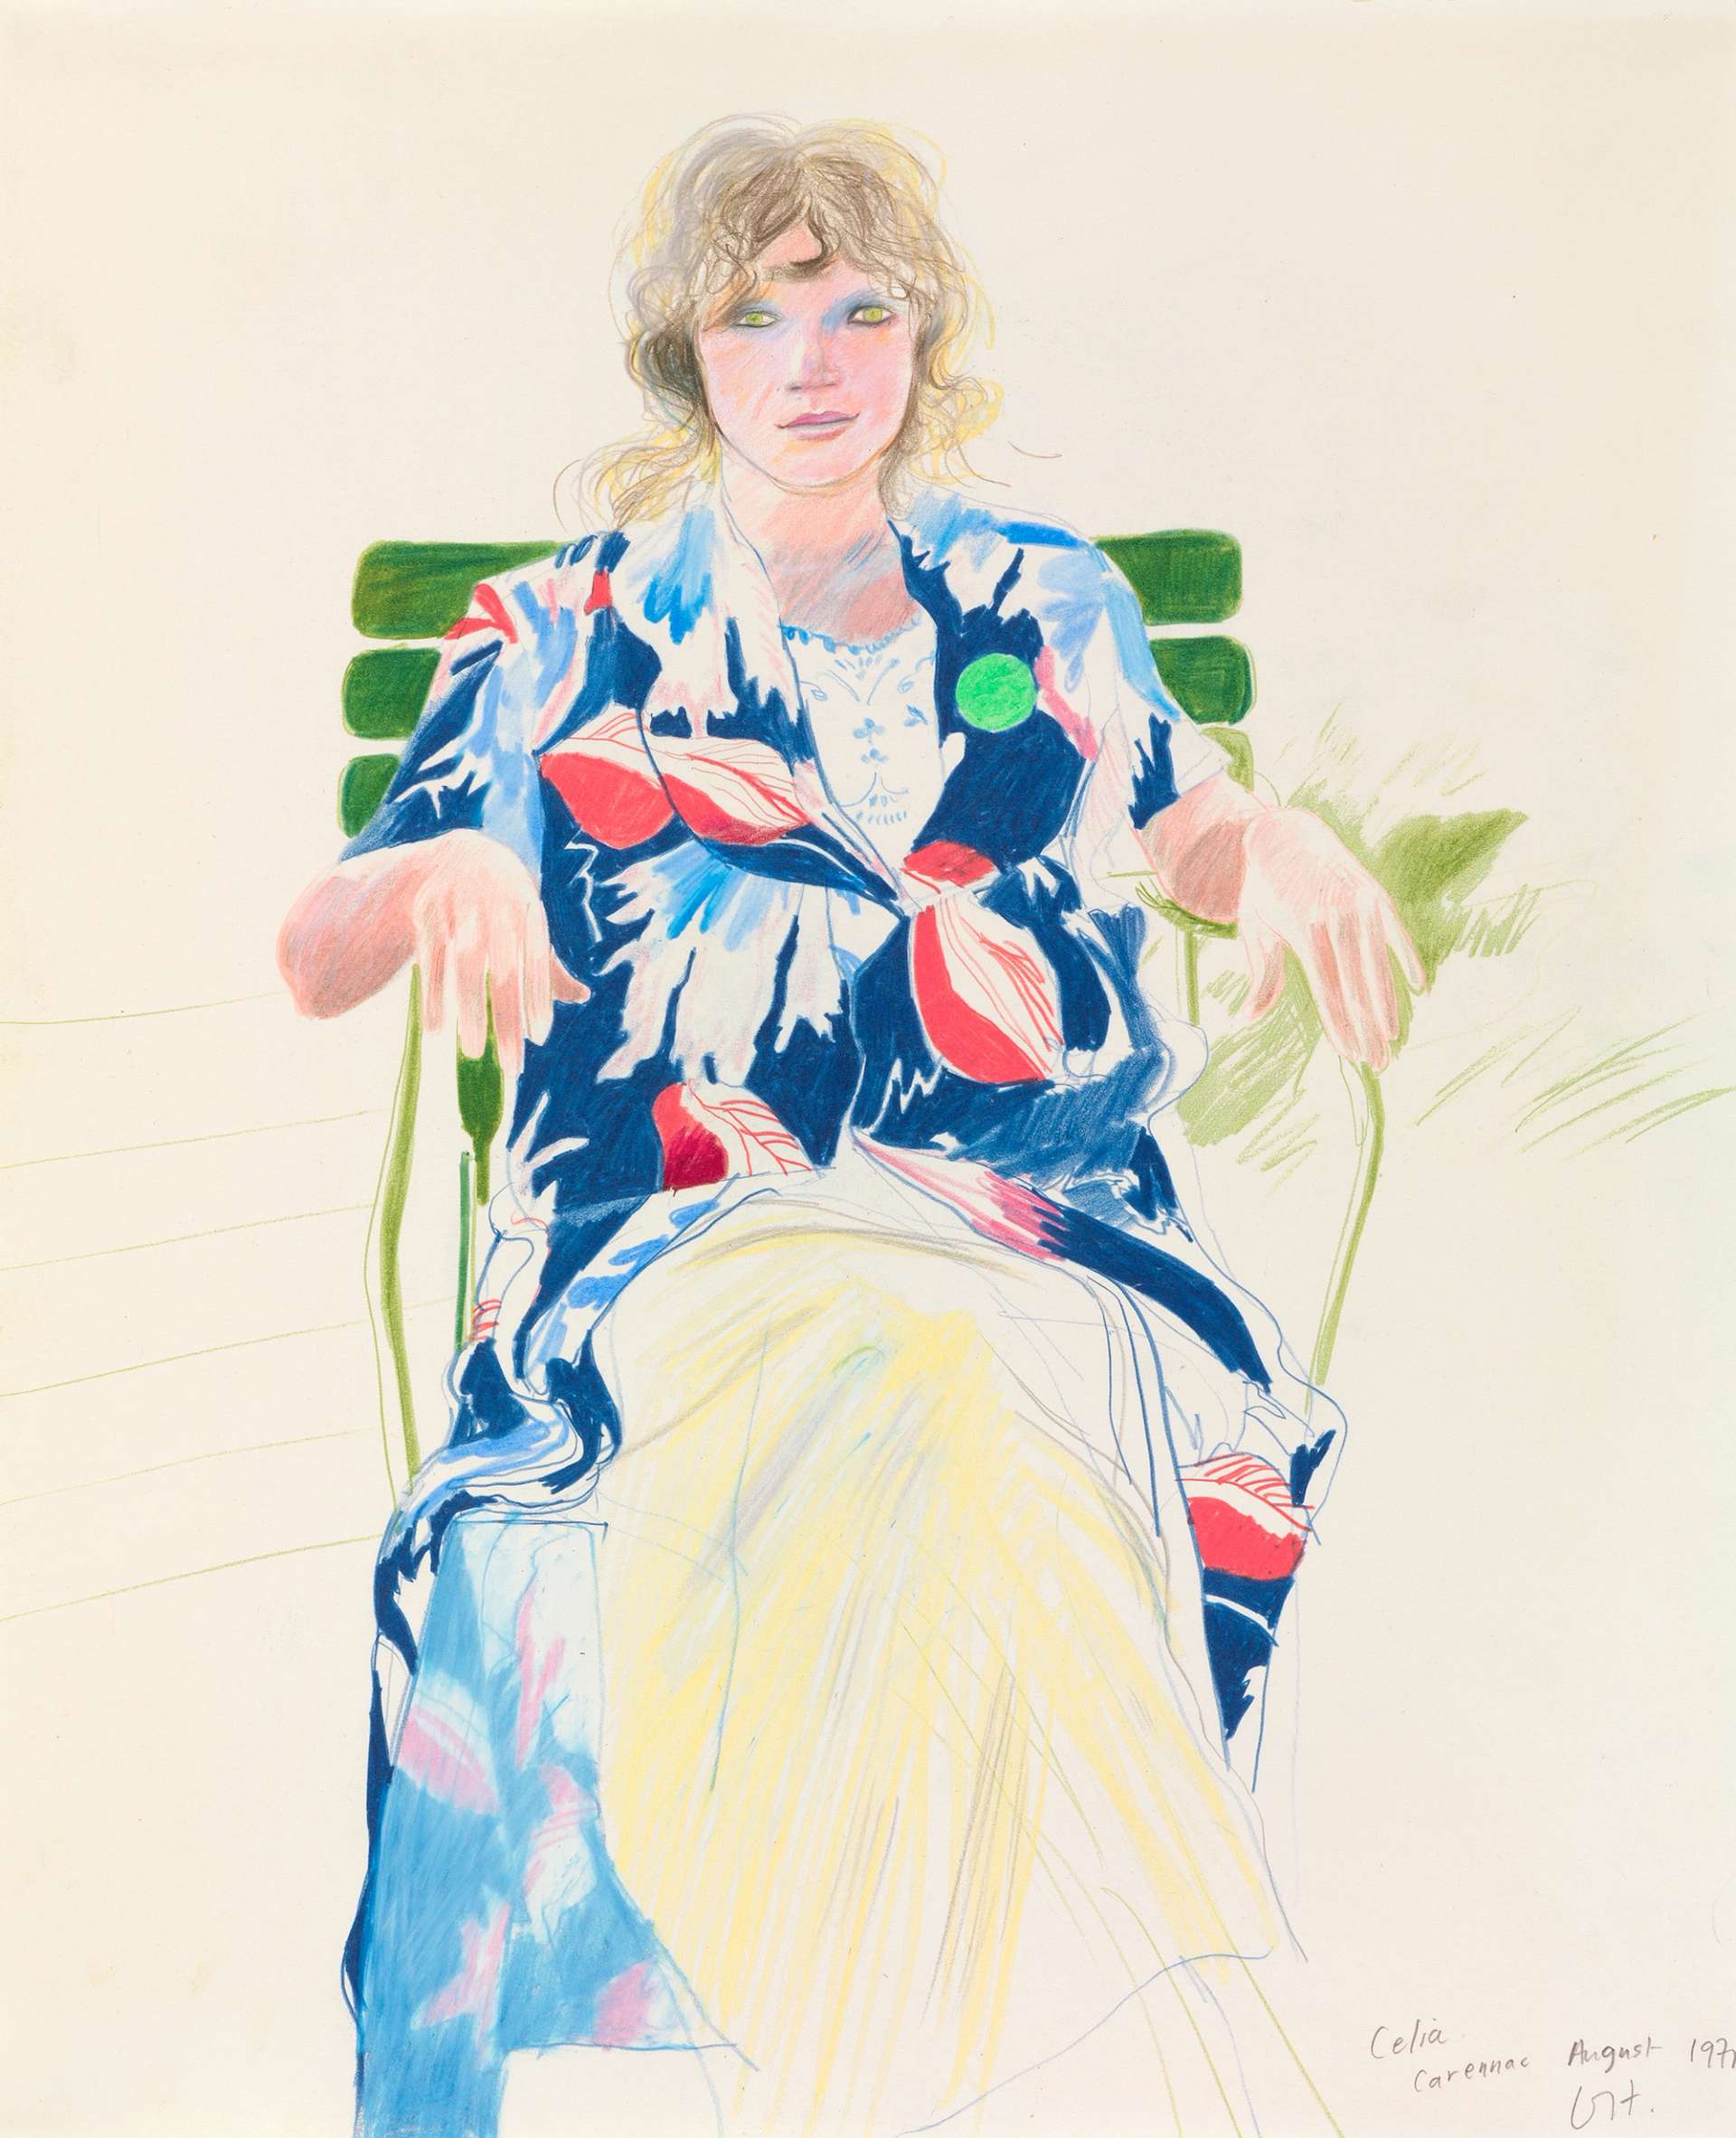 A coloured pencil portrait of textile designer Celia Birtwell by David Hockney. Celia is depicted sitting on a green chair, wearing a blue floral garment over a yellow dress, looking out directly to the viewer.